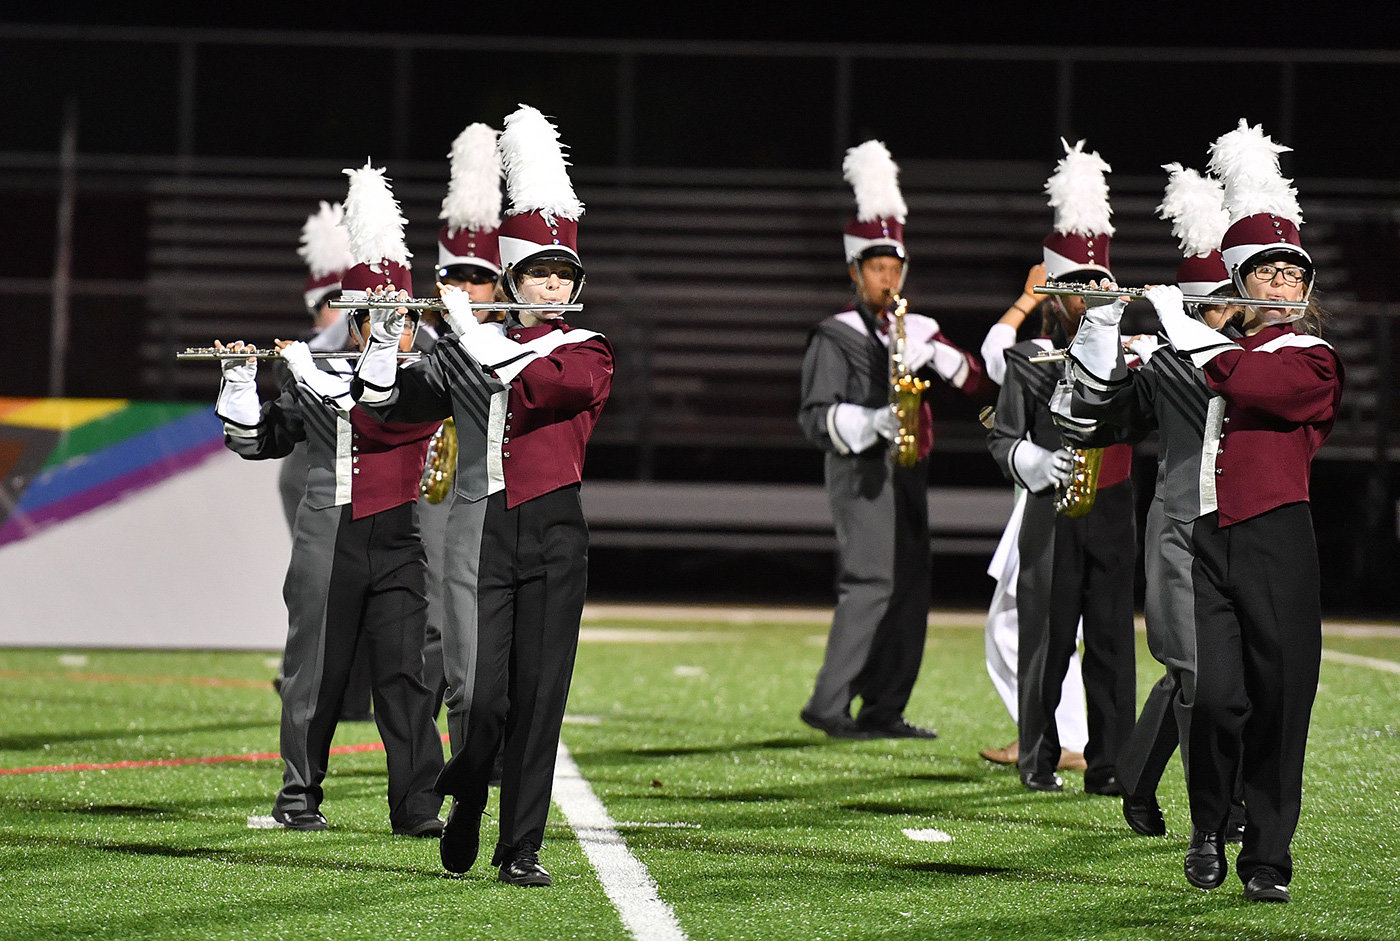 Members of the Broadneck High School marching band performed at the annual county exhibition.